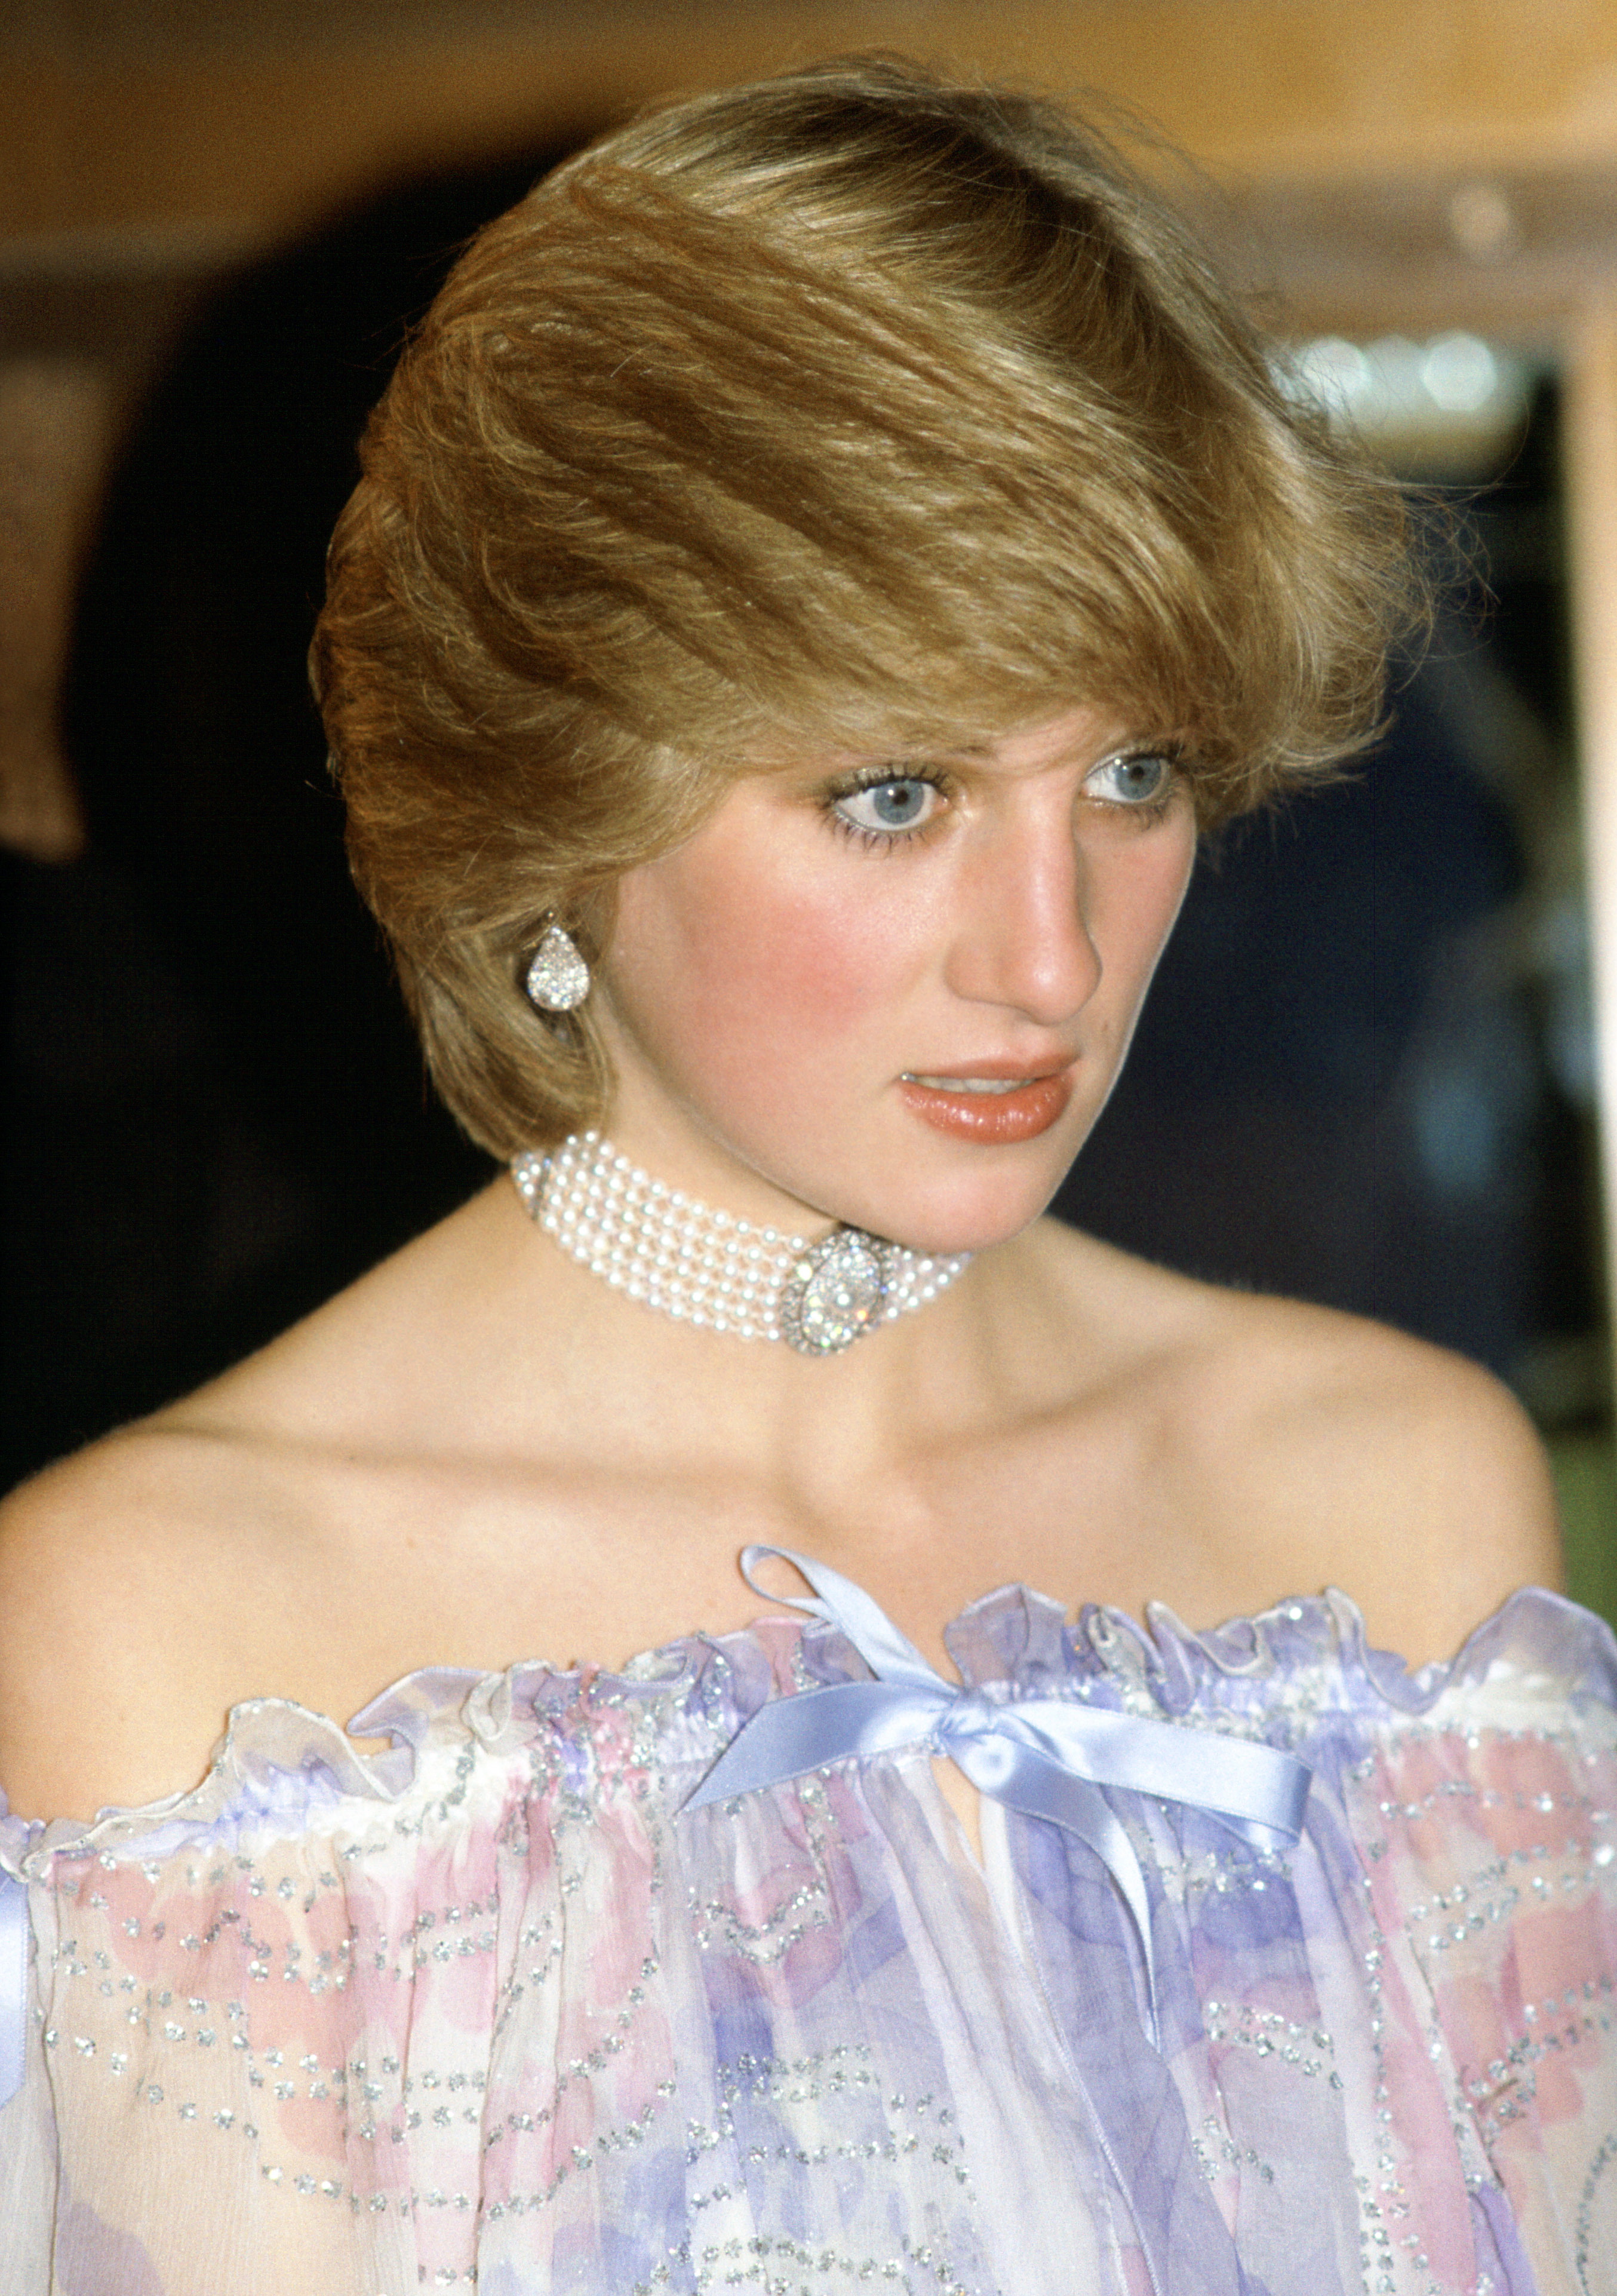 Diana Spencer photo 74 of 255 pics, wallpaper - photo #389594 - ThePlace2